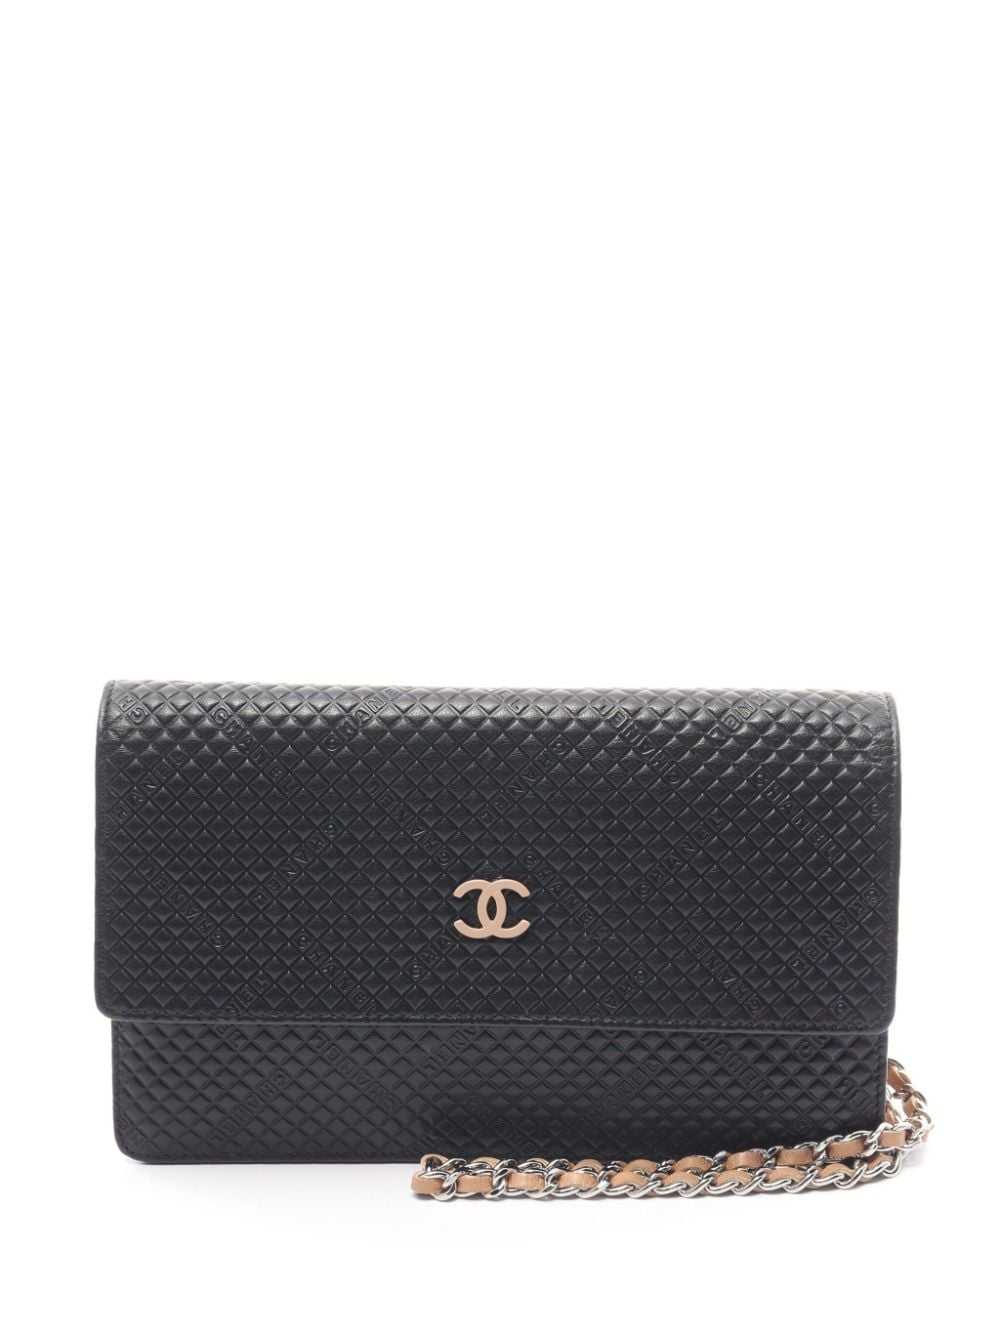 CHANEL Pre-Owned 2004-2005 micro diamond-quilted … - image 1